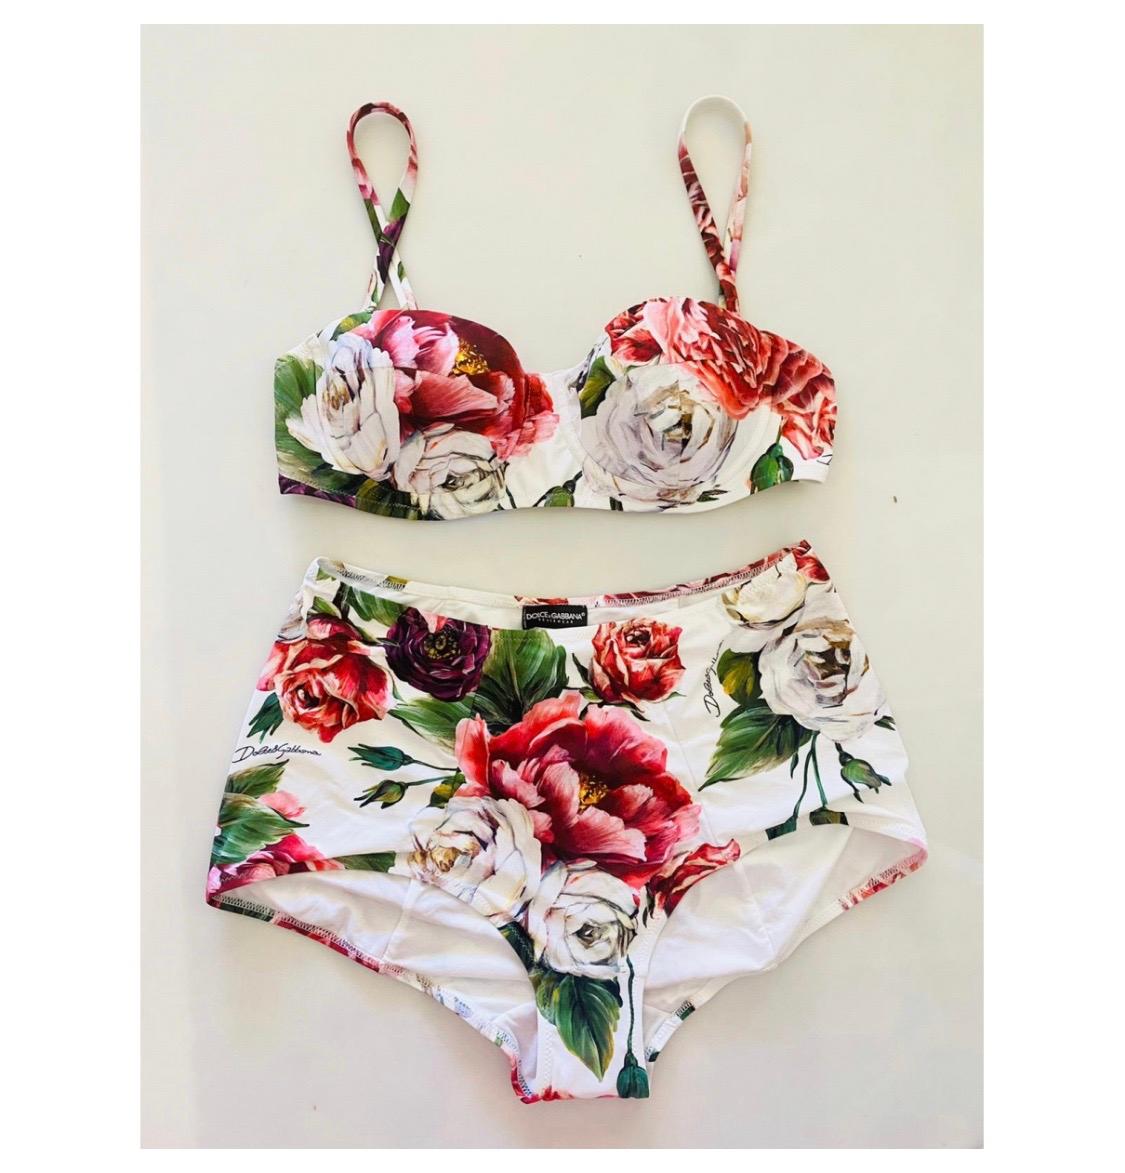 Dolce & Gabbana romantic built-in
balcony bra bikini top offers a
sophisticated look thanks to the
PEONY ROSE print and is made of the
precious “sensitive fabric”. The shaped
Cups guarantee structure and support;
The bikini bottom with high